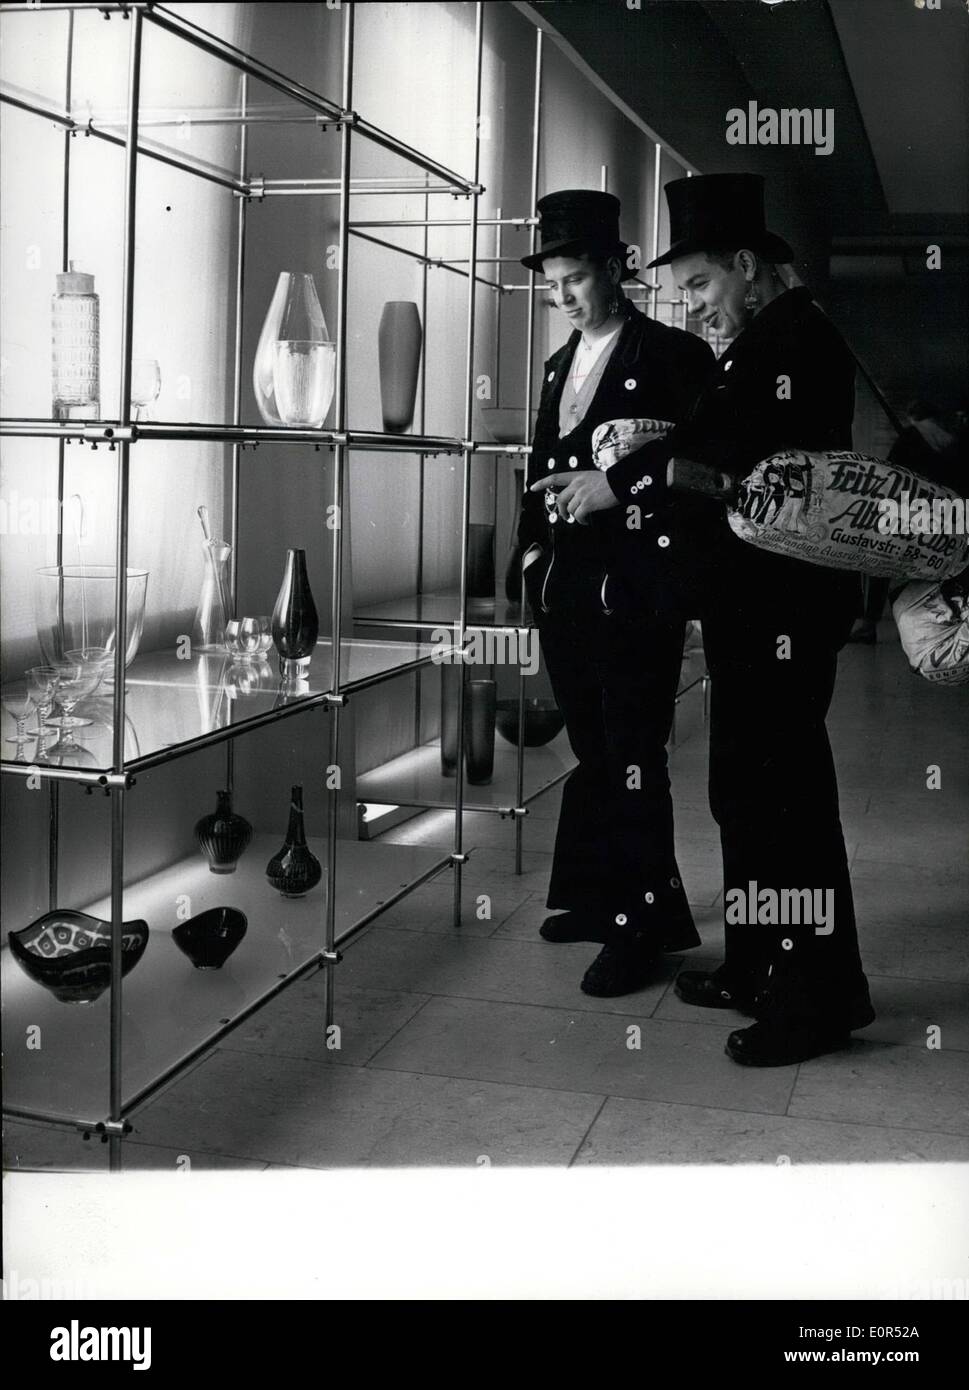 Feb. 02, 1958 - Carpenters of Hamburg admirers of fine glass-ware To the first guests and admirers of beautifully formed glass-ware of the Italian glass blower factory Venini-Murano and the Swedish glass blower factory Orrefors, exhibited in the Munich Chamber of Craftsmanship. Two carpenters of Hamburg were belonging, our picture. Stock Photo